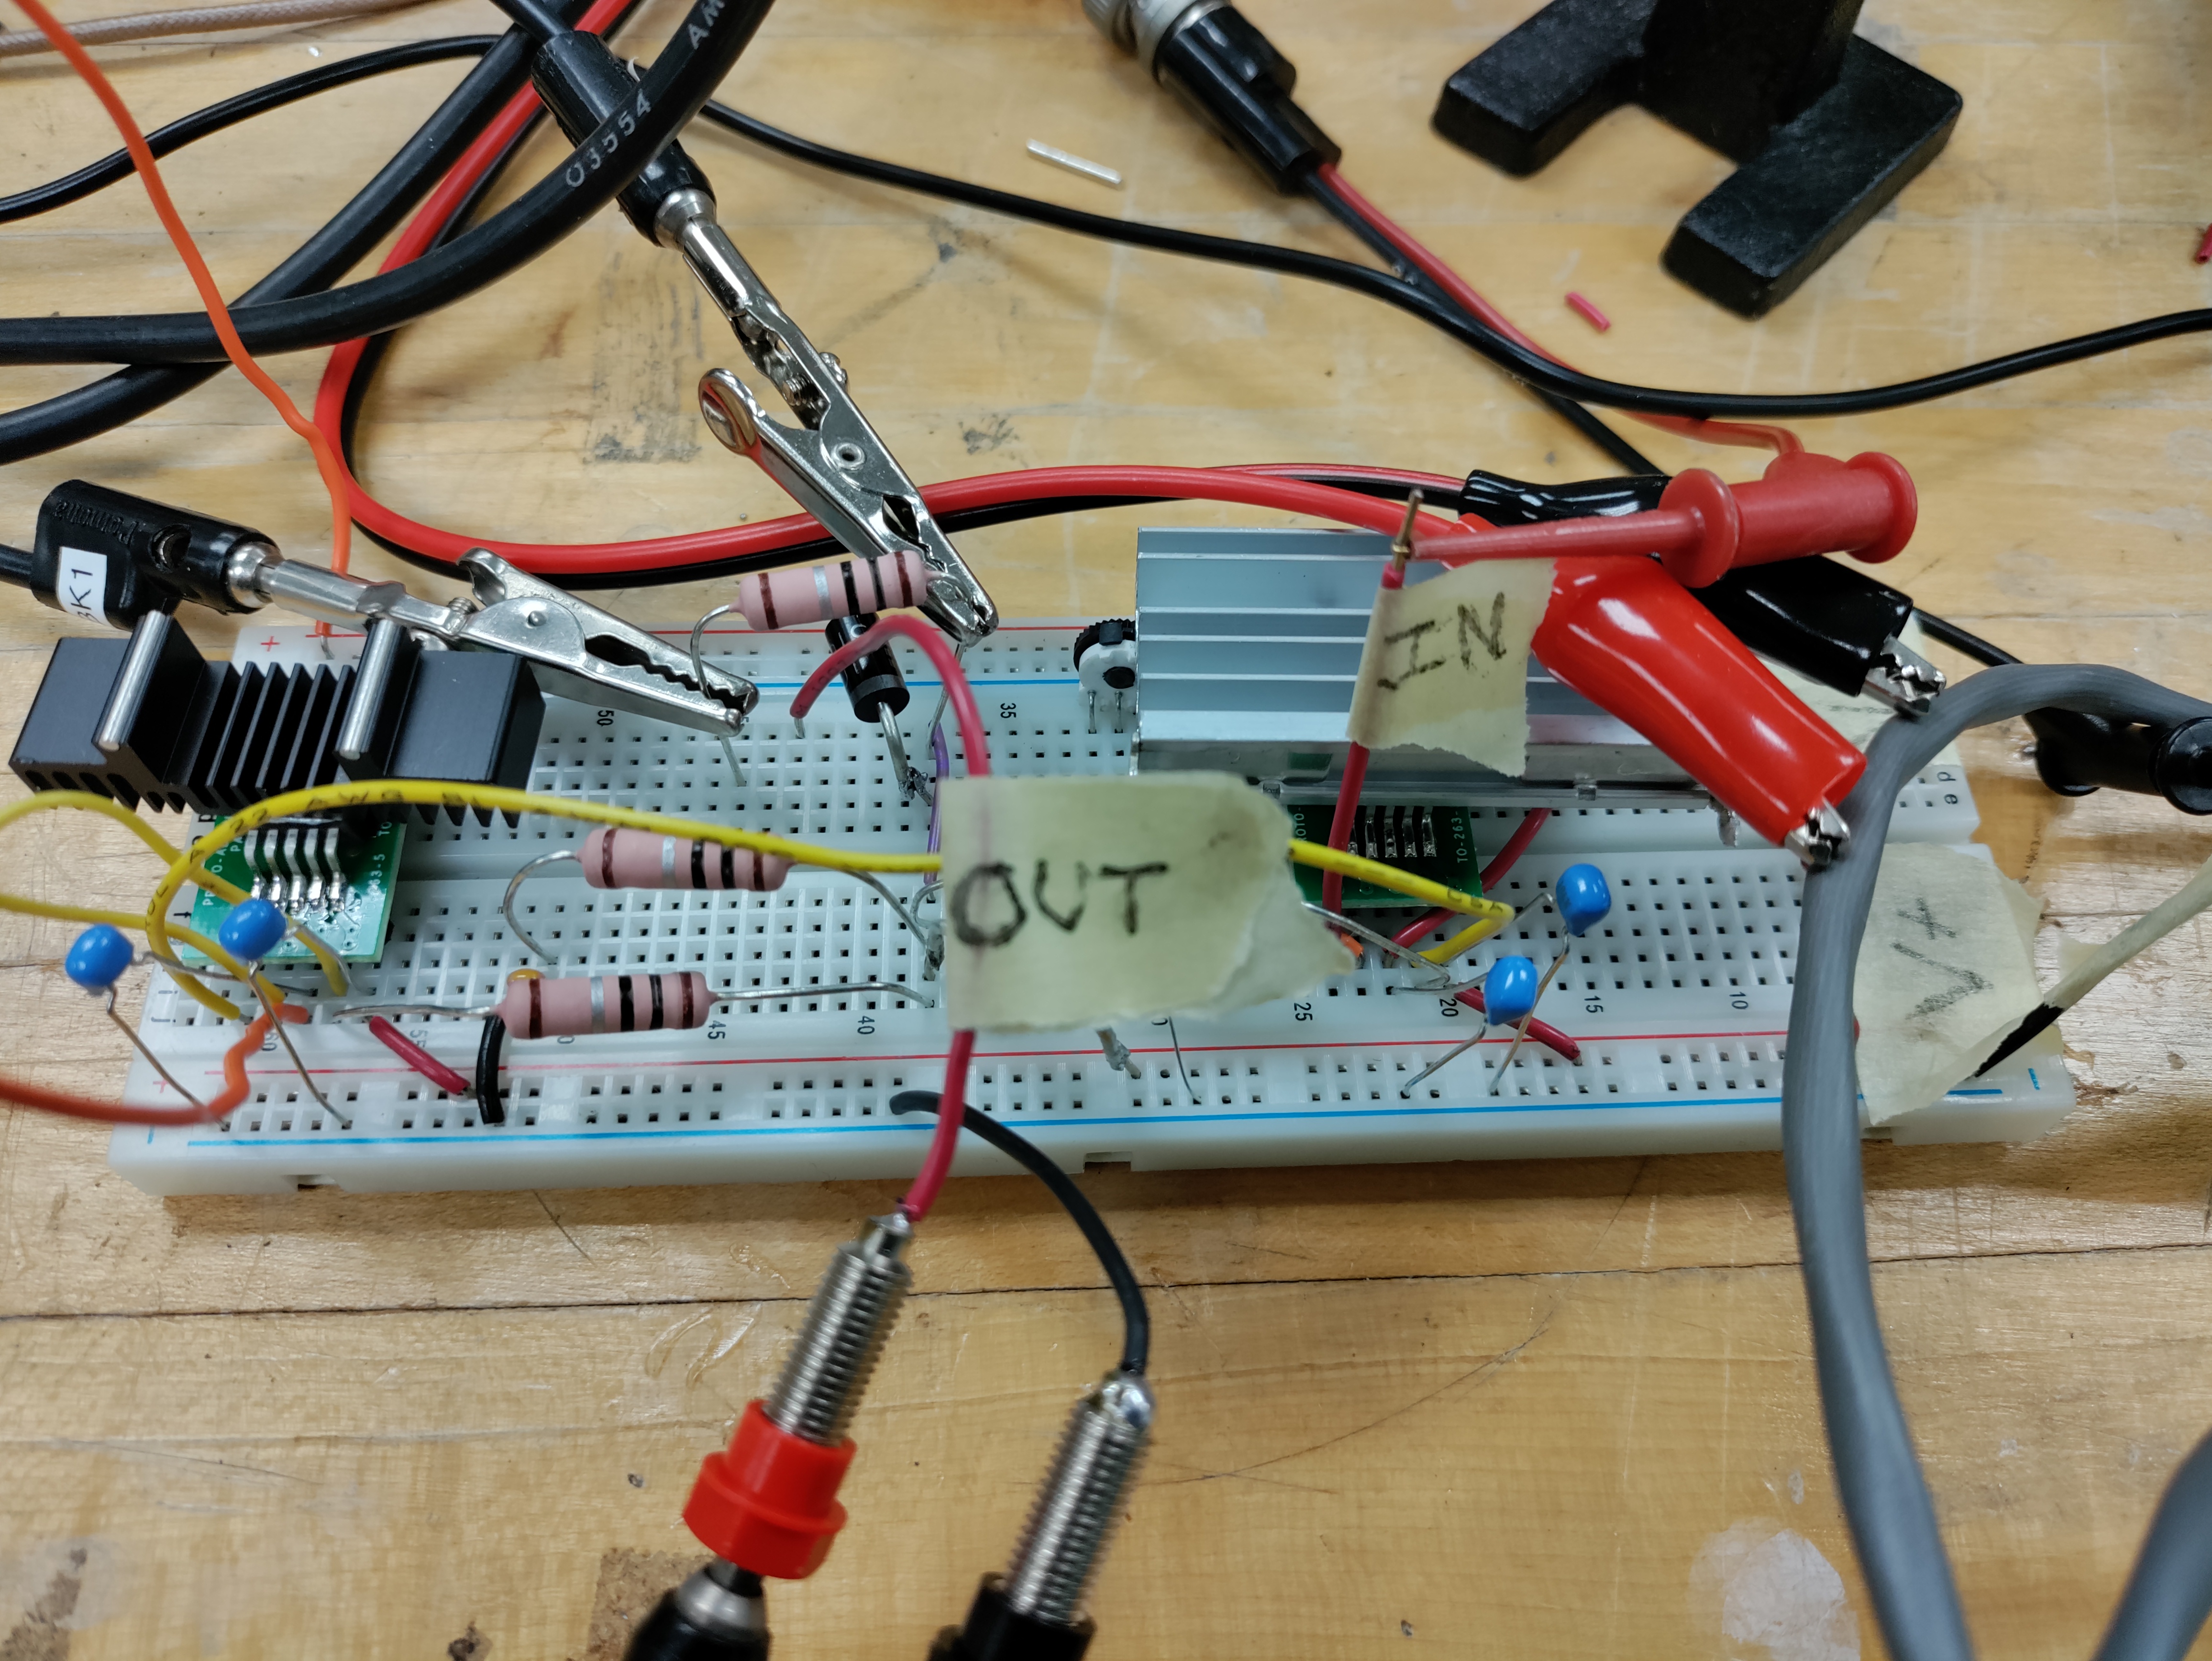 Figure 4: Dual Op Amp circuit set up on a bread board (in very messy fashion)